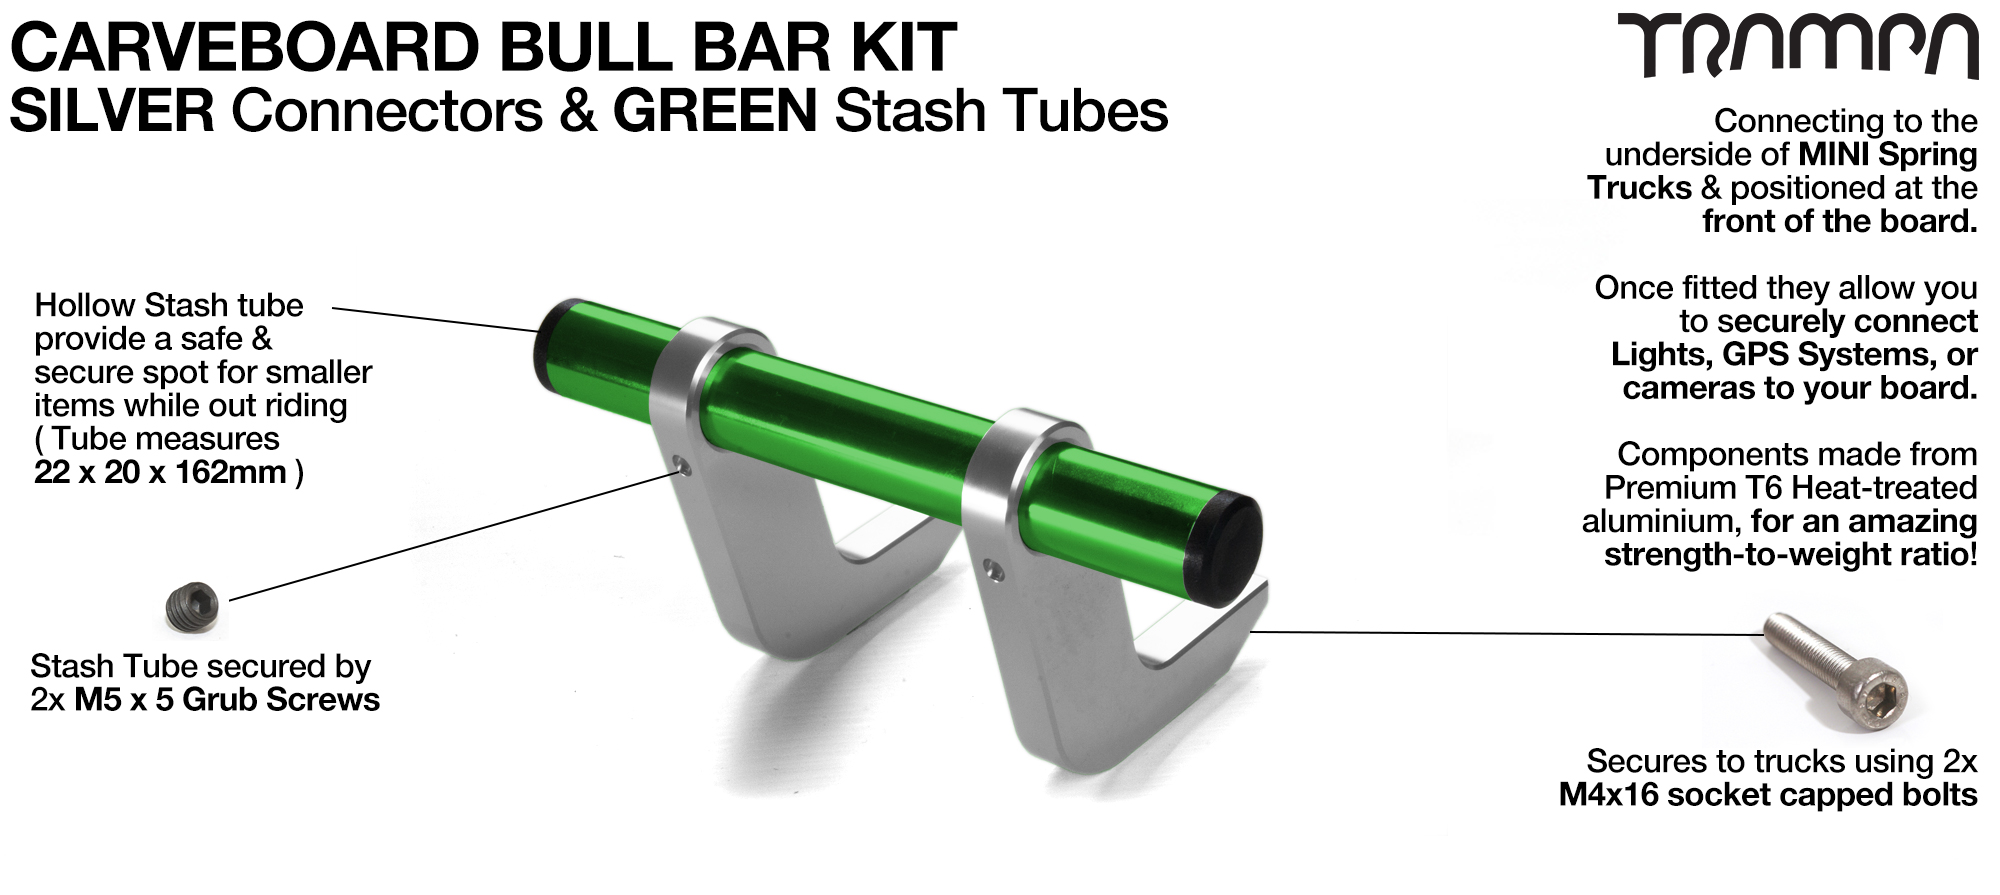 SILVER Uprights & GREEN Crossbar BULL BARS for CARVE BOARDS using T6 Heat Treated CNC'd Aluminum Clamps, Hollow Aluminium Stash Tubes with Rubber end bungs 